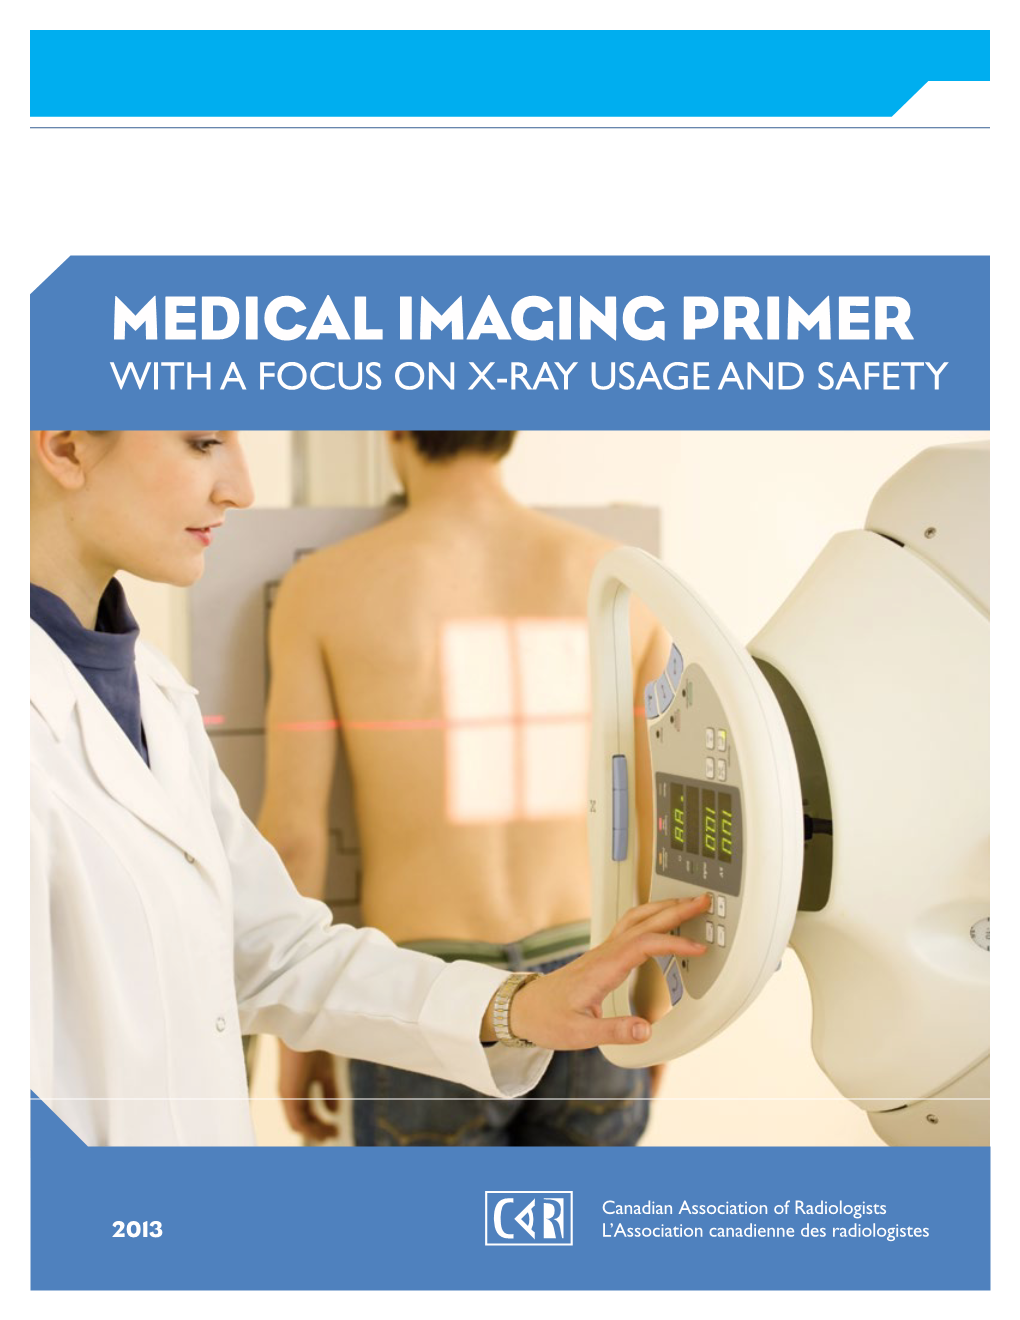 Medical Imaging Primer with a Focus on X-Ray Usage and Safety